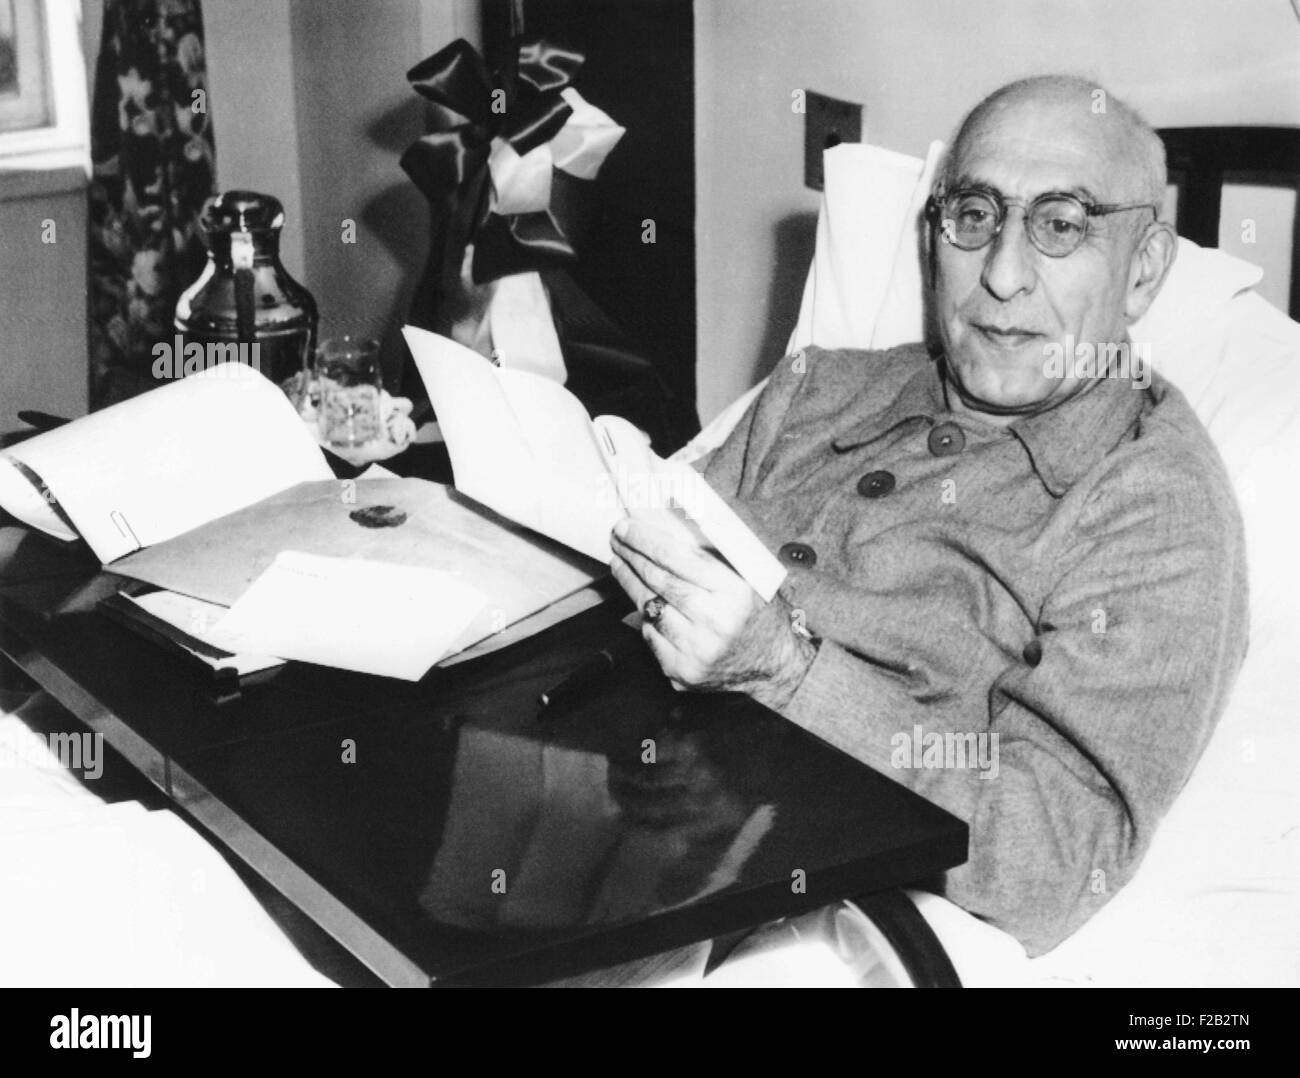 Iranian premier Mohammed Mossadegh in his suite at New York Hospital, Oct. 12, 1951. The 69 year old leader rested before pleading Iran's case against Britain for refusing to negotiate terms for the legitimate Iranian nationalization of the Anglo Iranian Oil Company refineries. (CSU 2015 8 504) Stock Photo